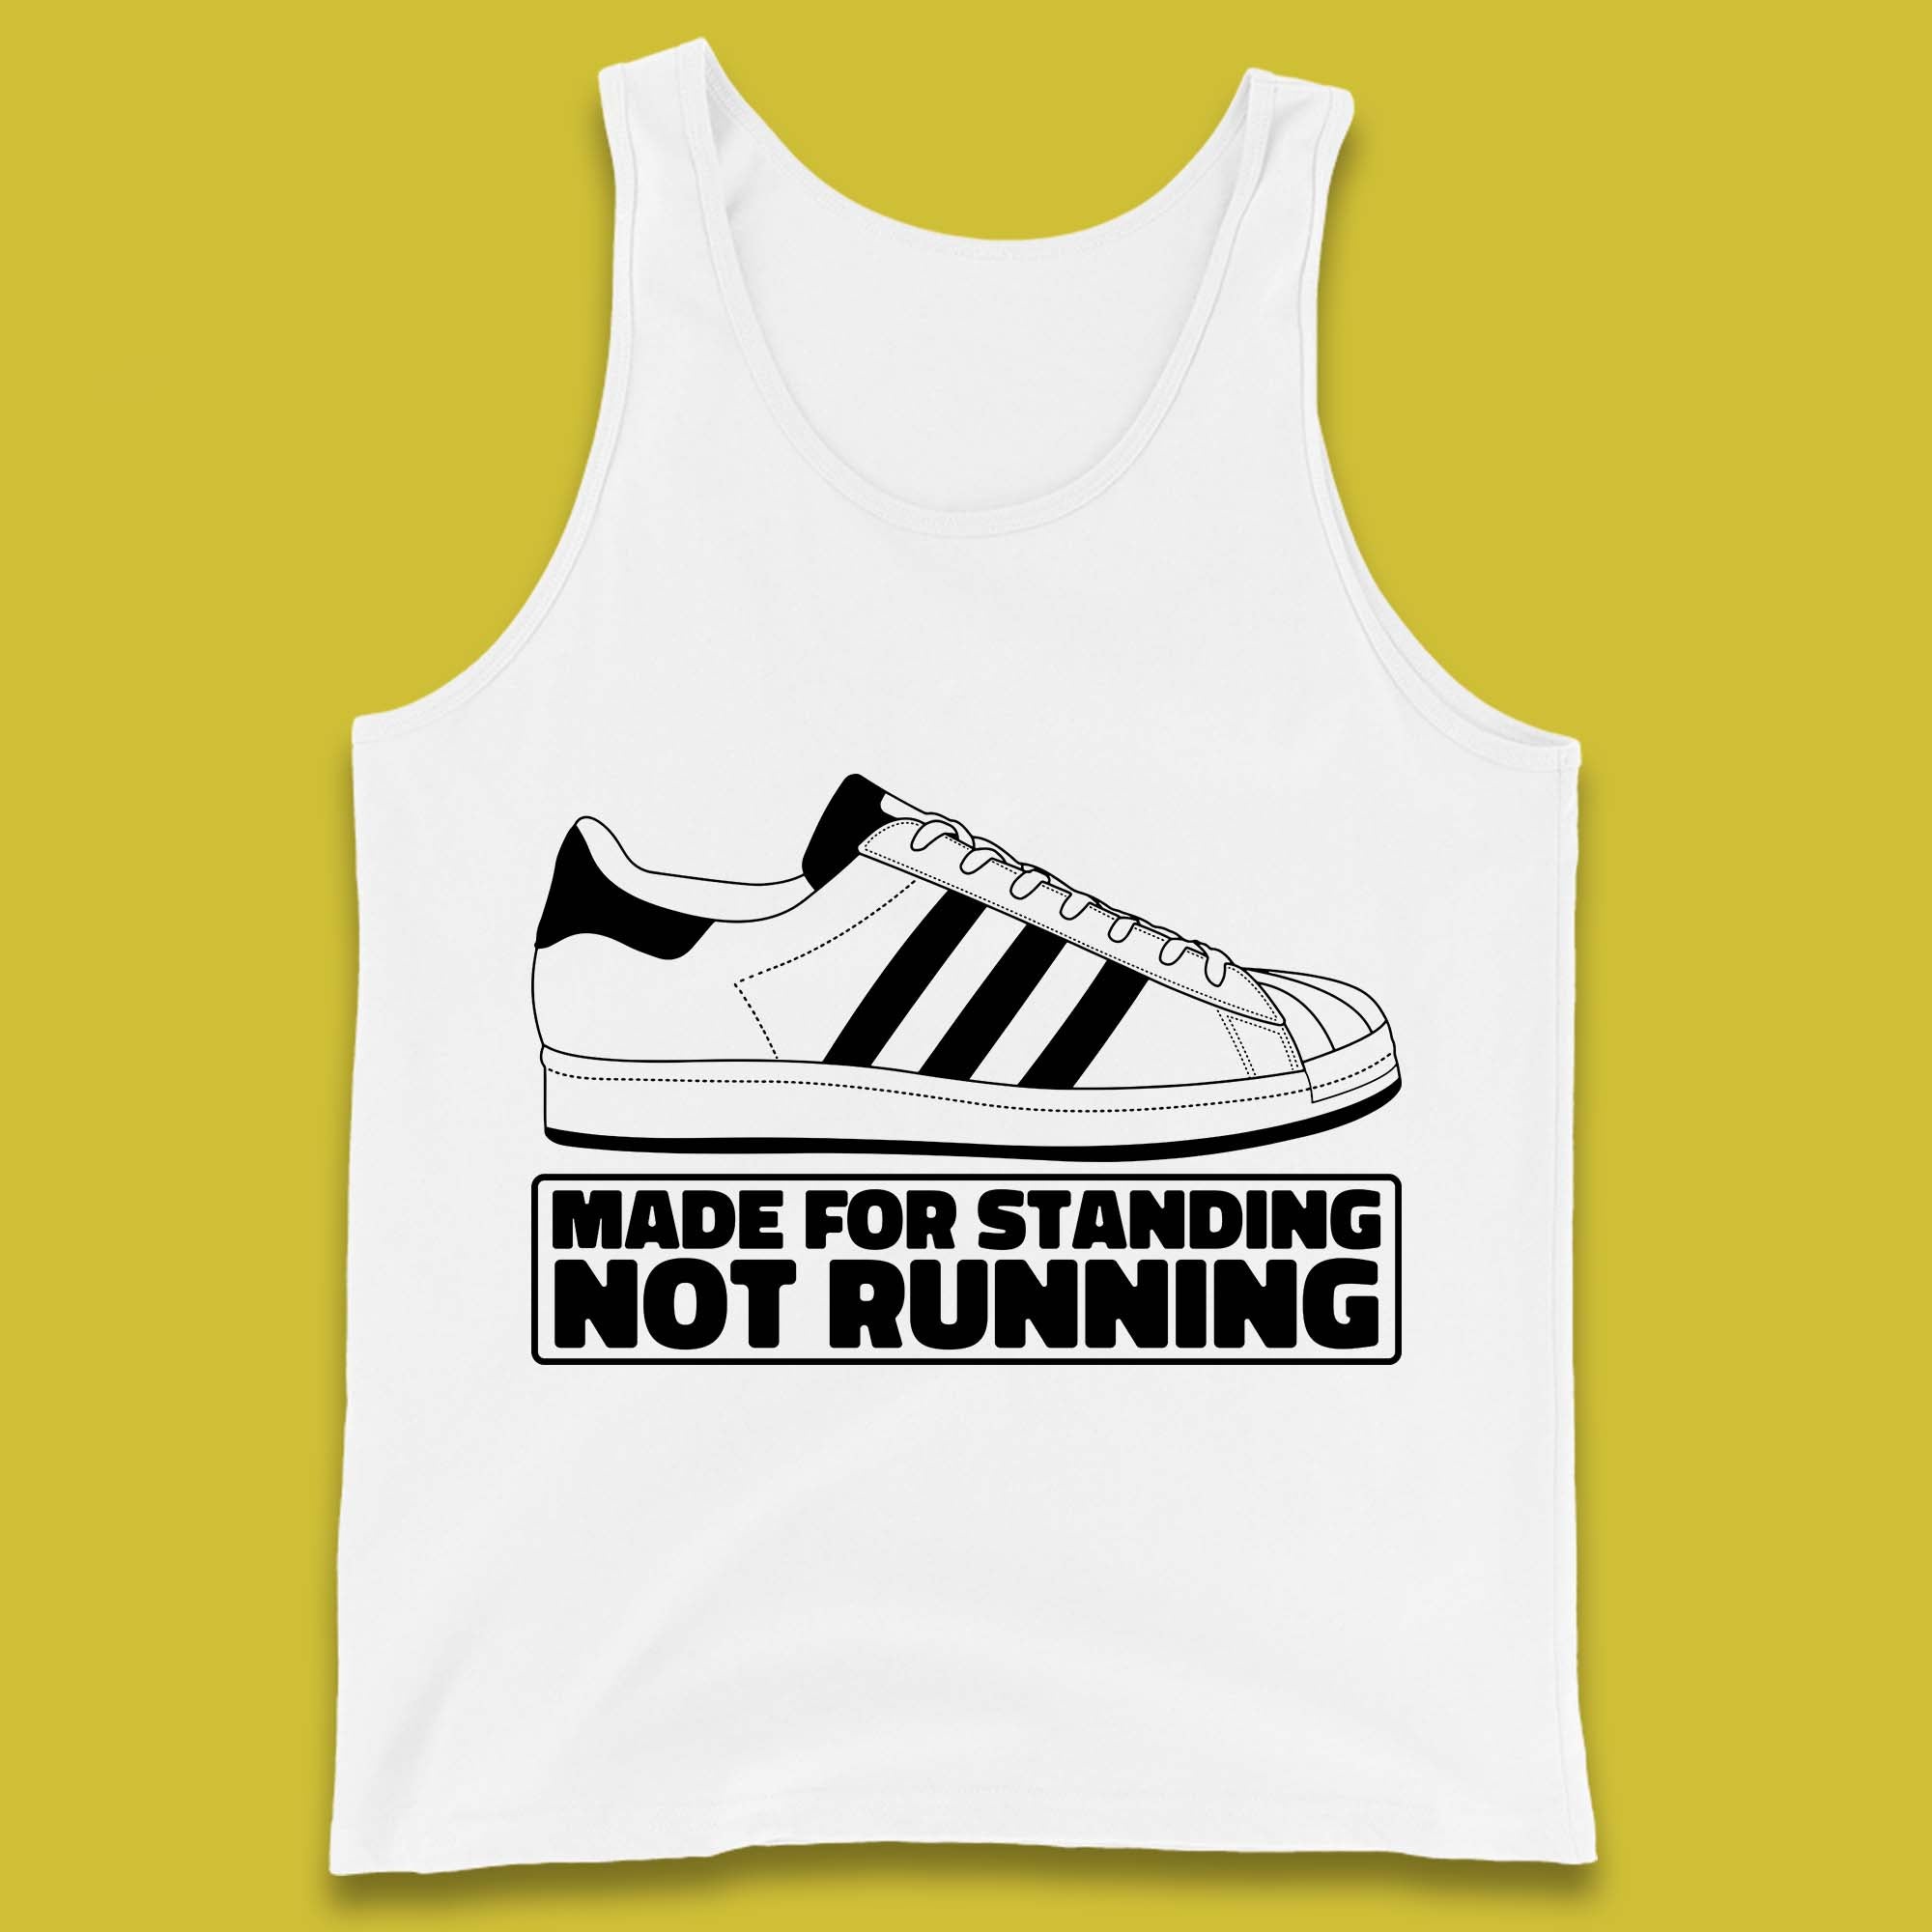 Made For Standing Not Running Football Hooligan Trimm Trab Terraces Tank Top